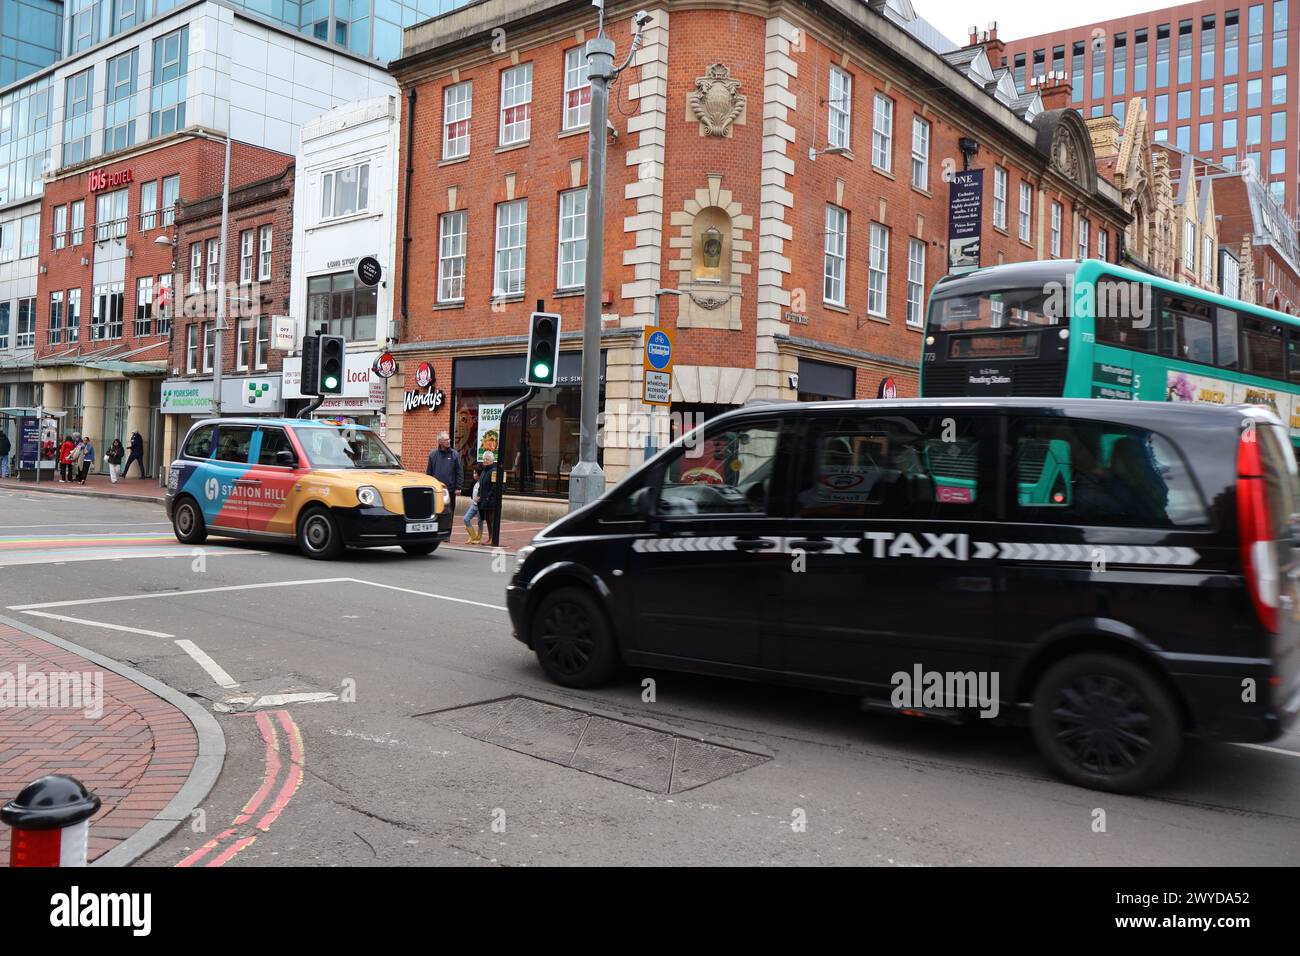 Local taxis driving past each other in Friar Street in Reading Berkshire UK. Charles Dye / Alamy Stock Photo